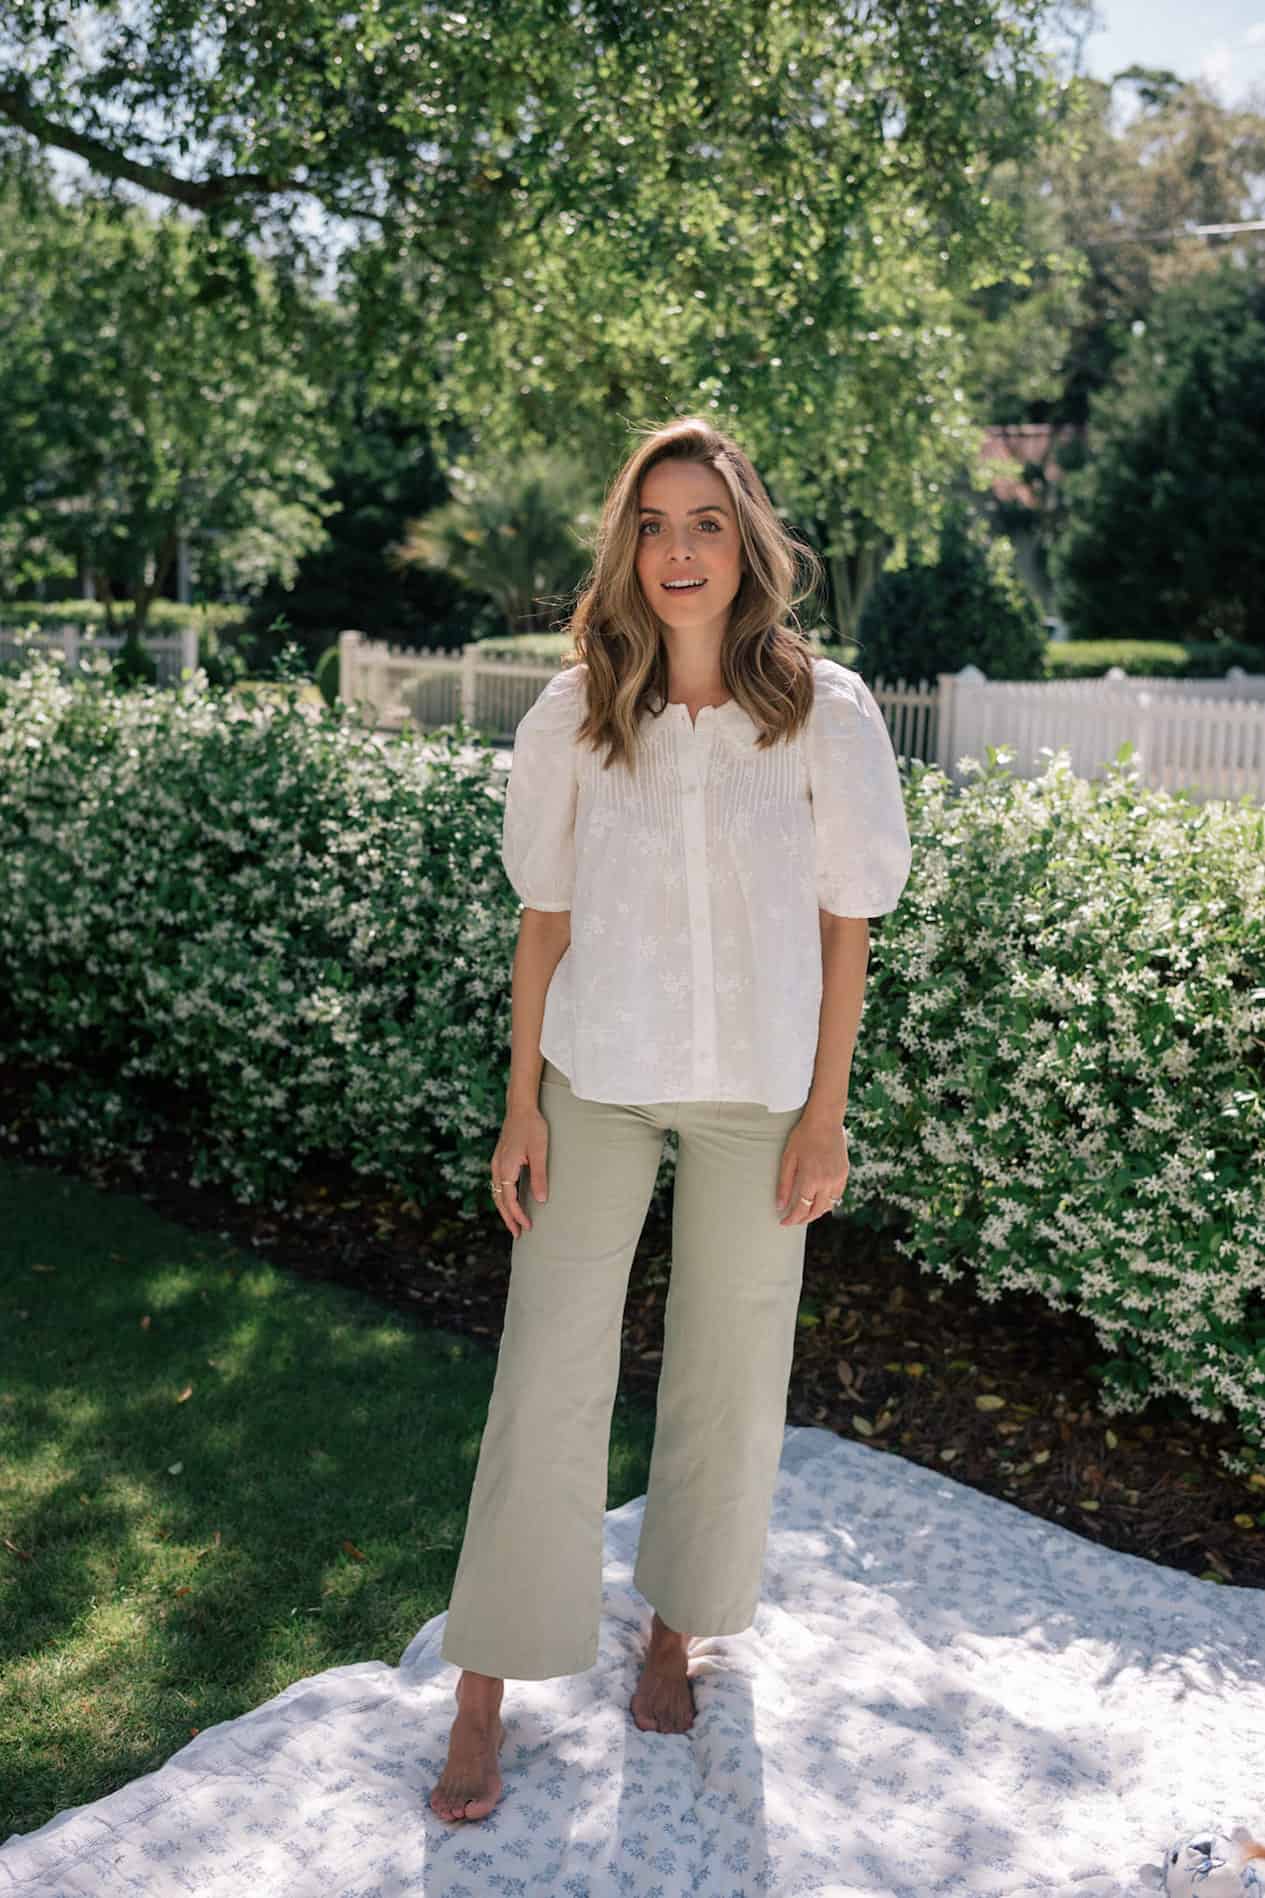 image of a woman wearing a white embroidered blouse and light green pants standing in a treed area